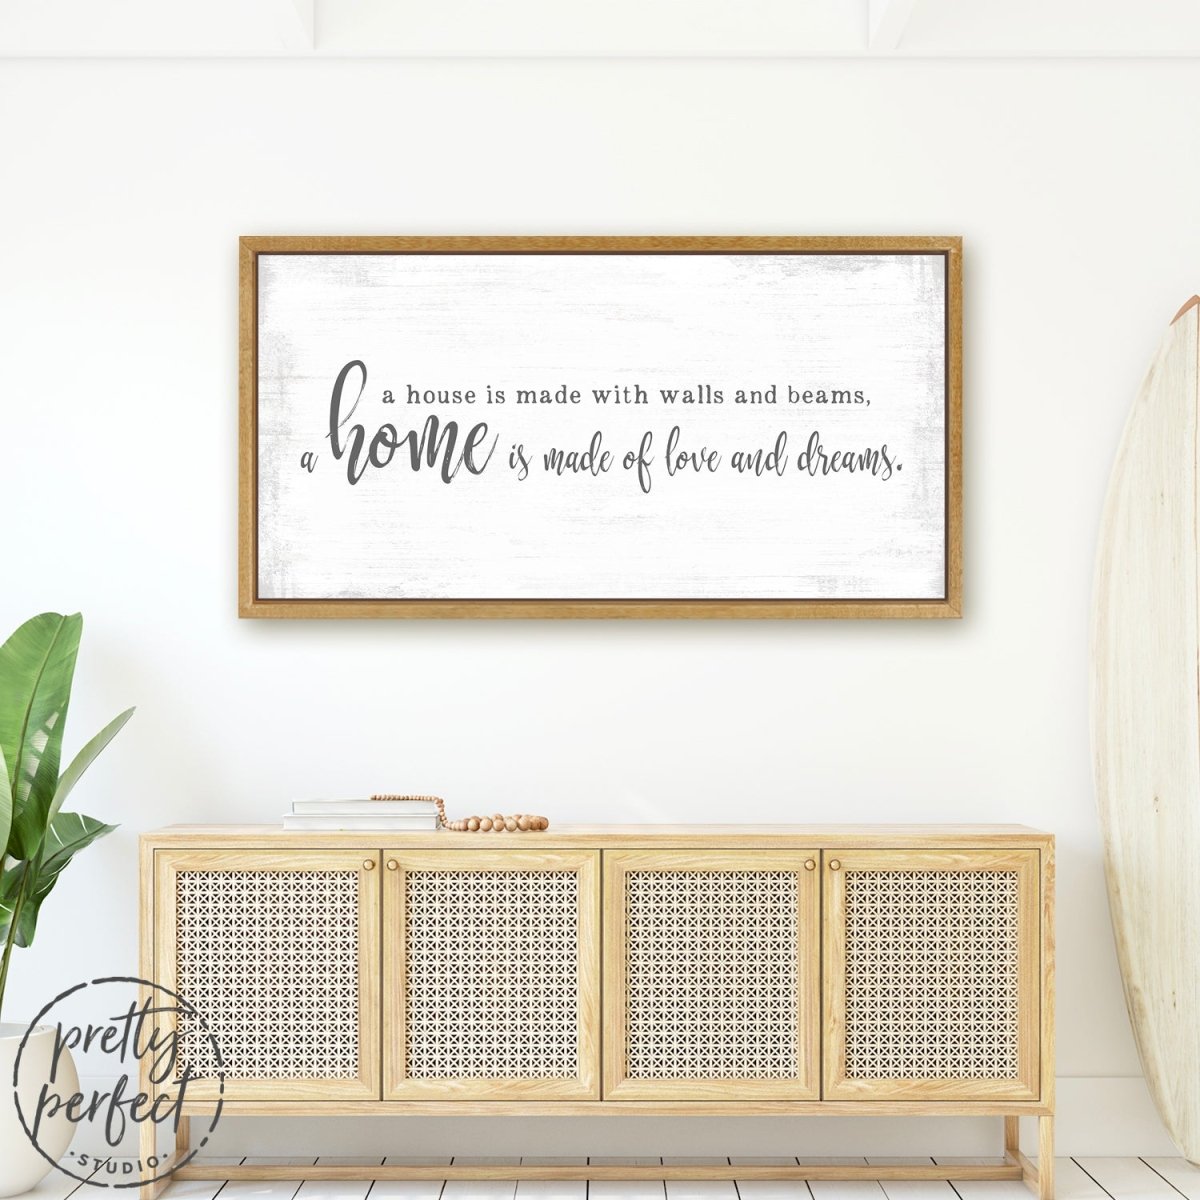 A Home Is Made Of Love and Dreams Sign Above Entryway Table - Pretty Perfect Studio